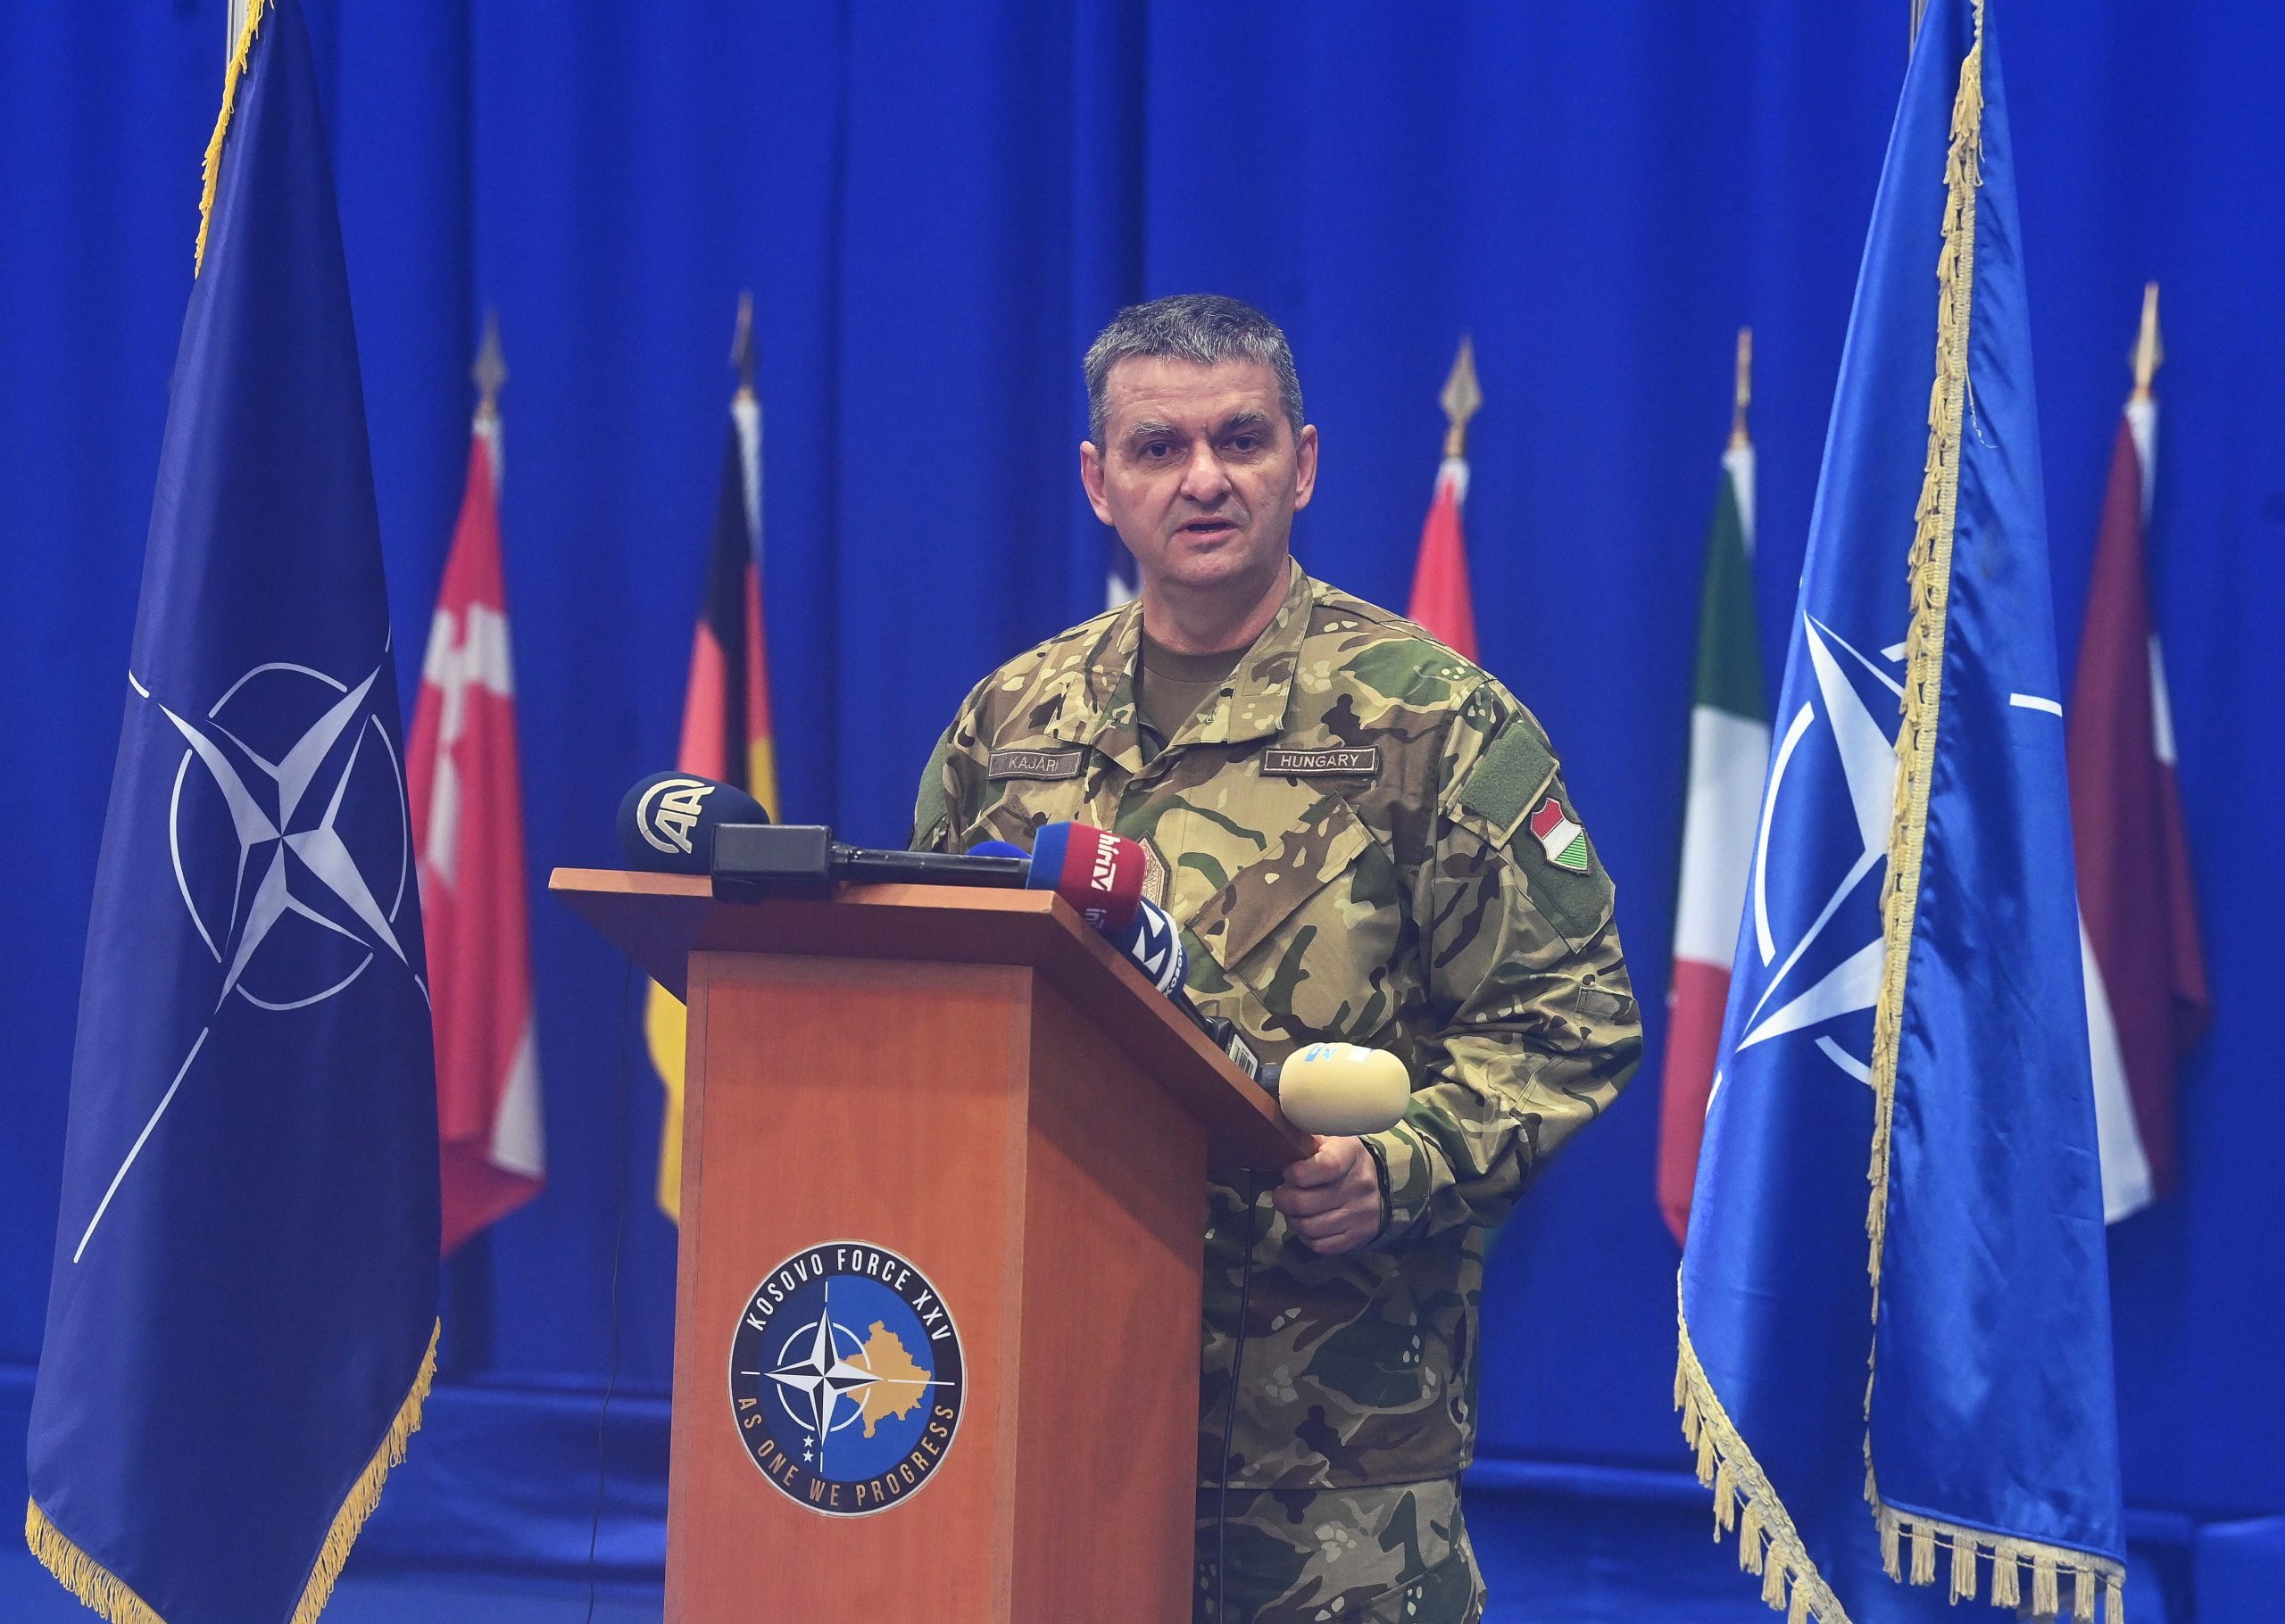 Major General Kajári First Hungarian to Serve as KFOR Mission Chief